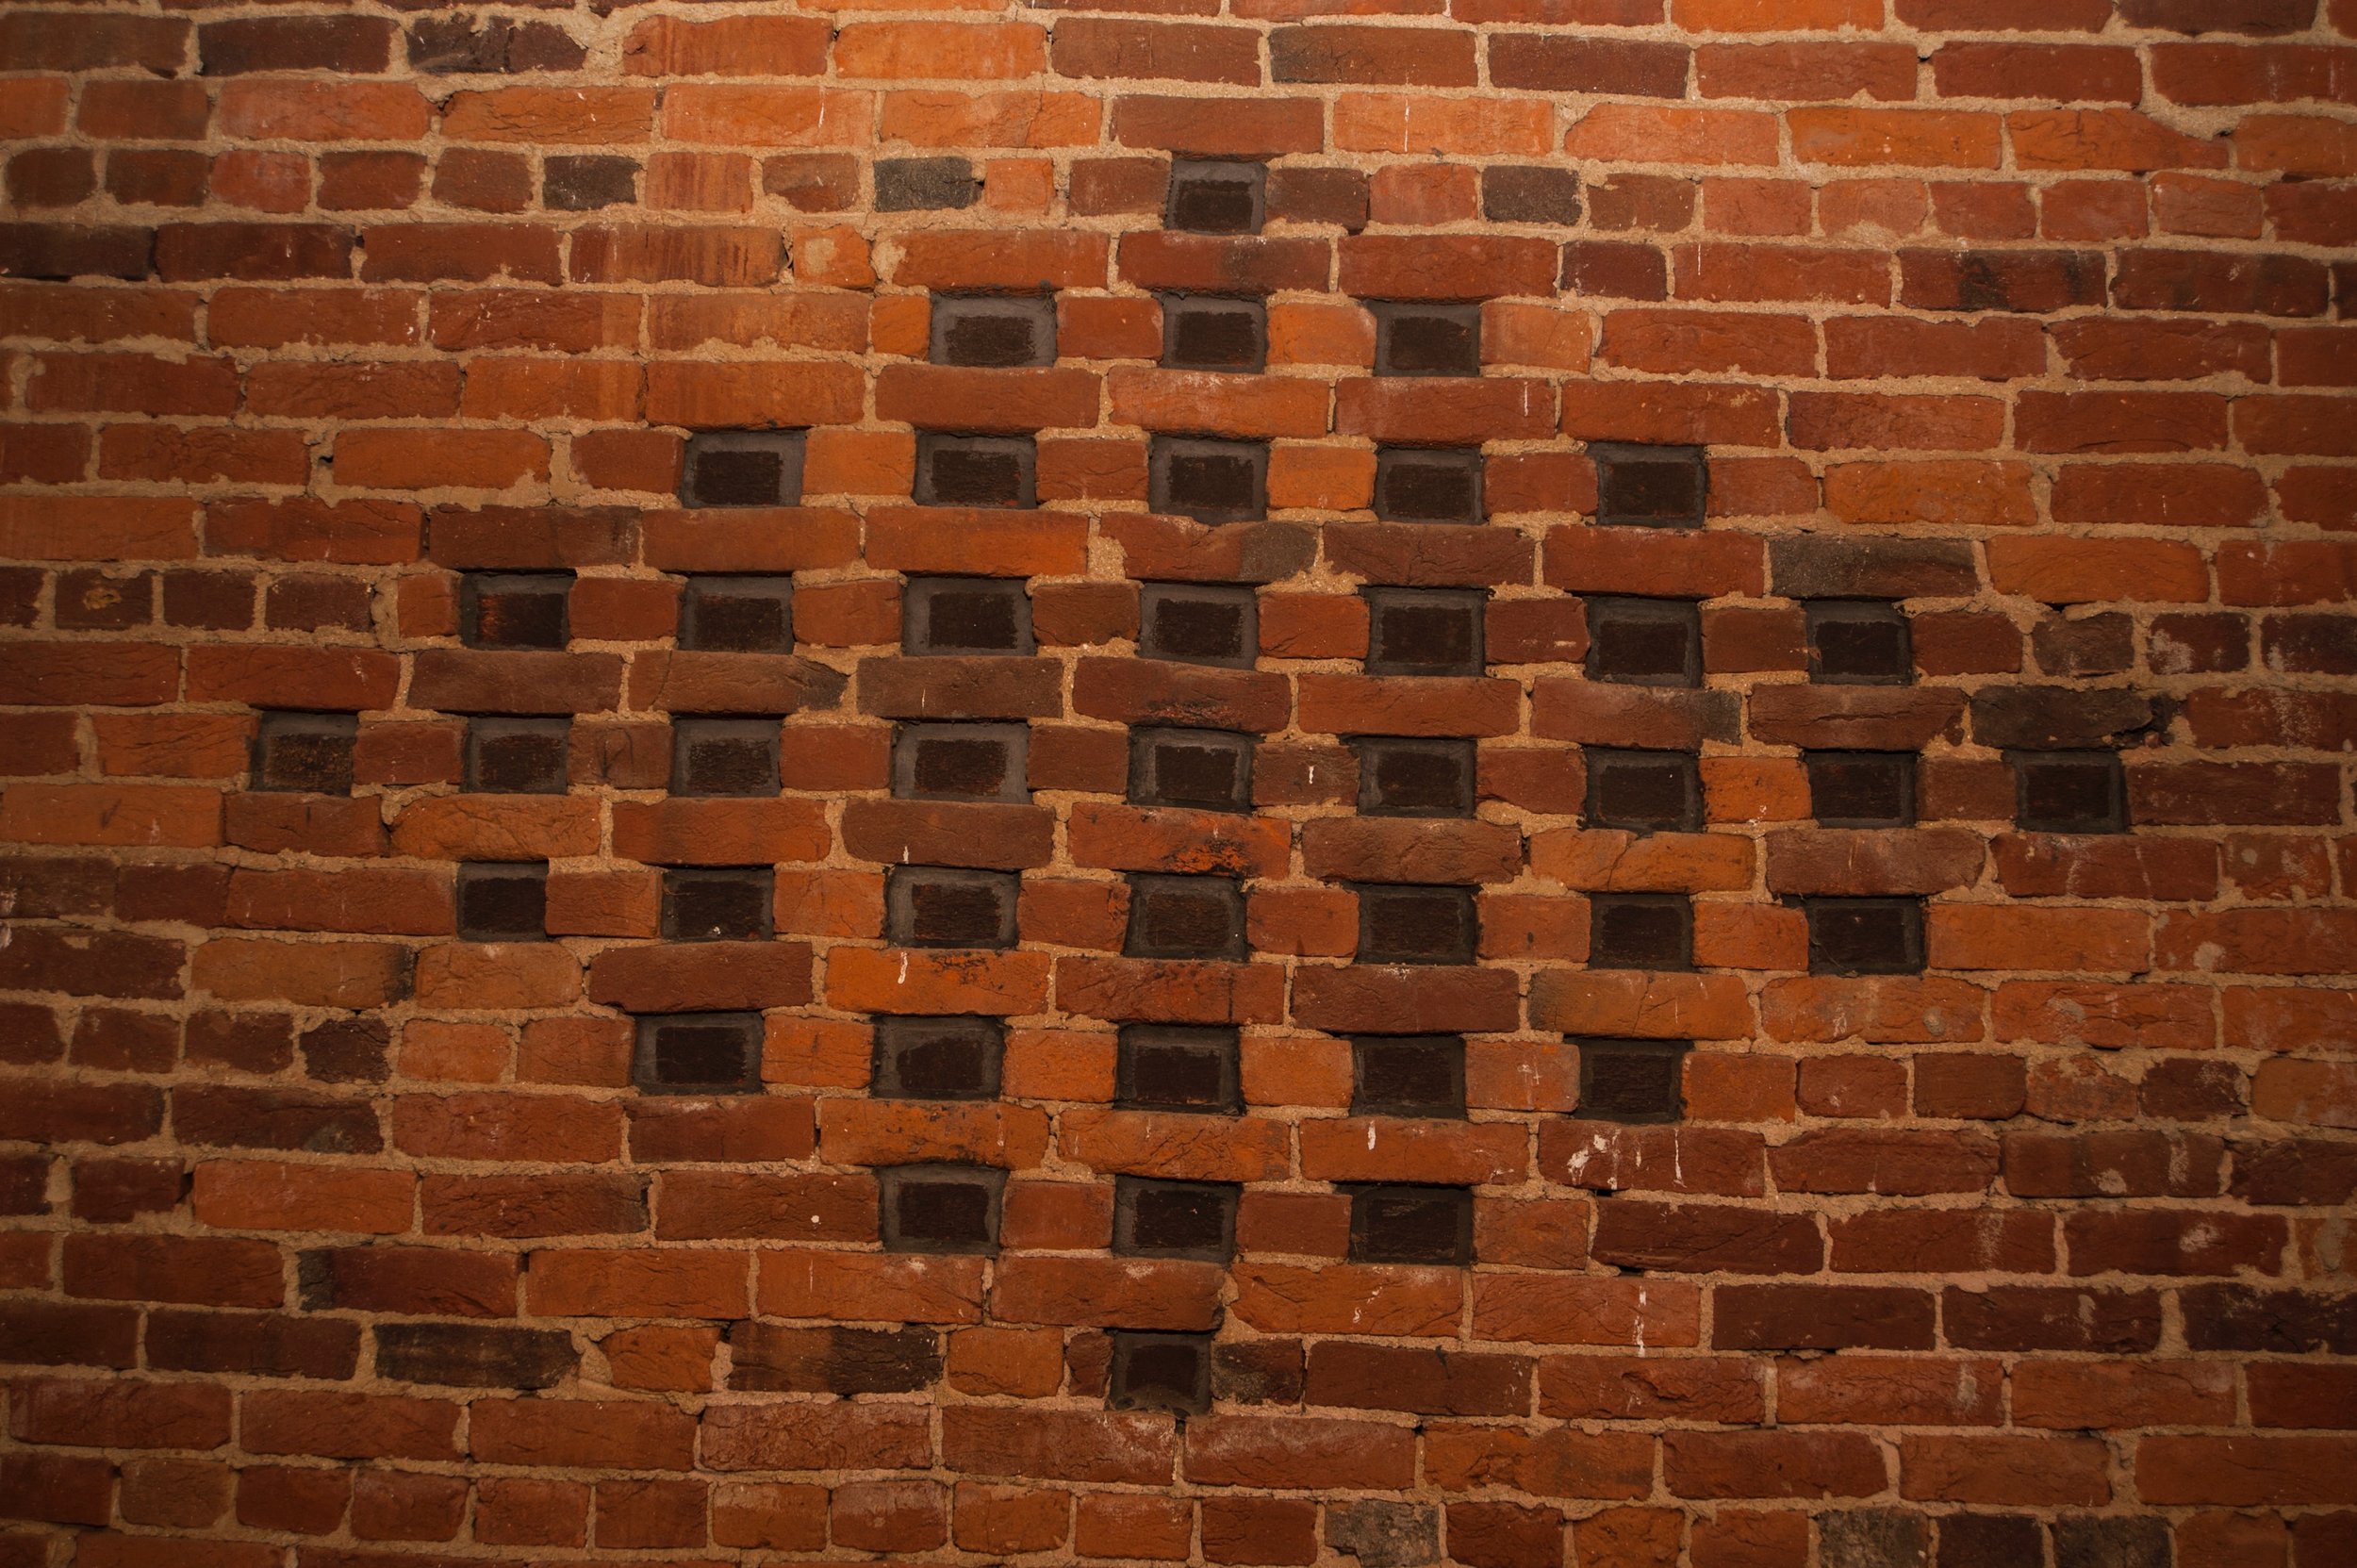  "Vents" were engineered by Allen Cochran to resemble the real thing. To give the illusion of openings, he set black bricks on end and recessed them.   